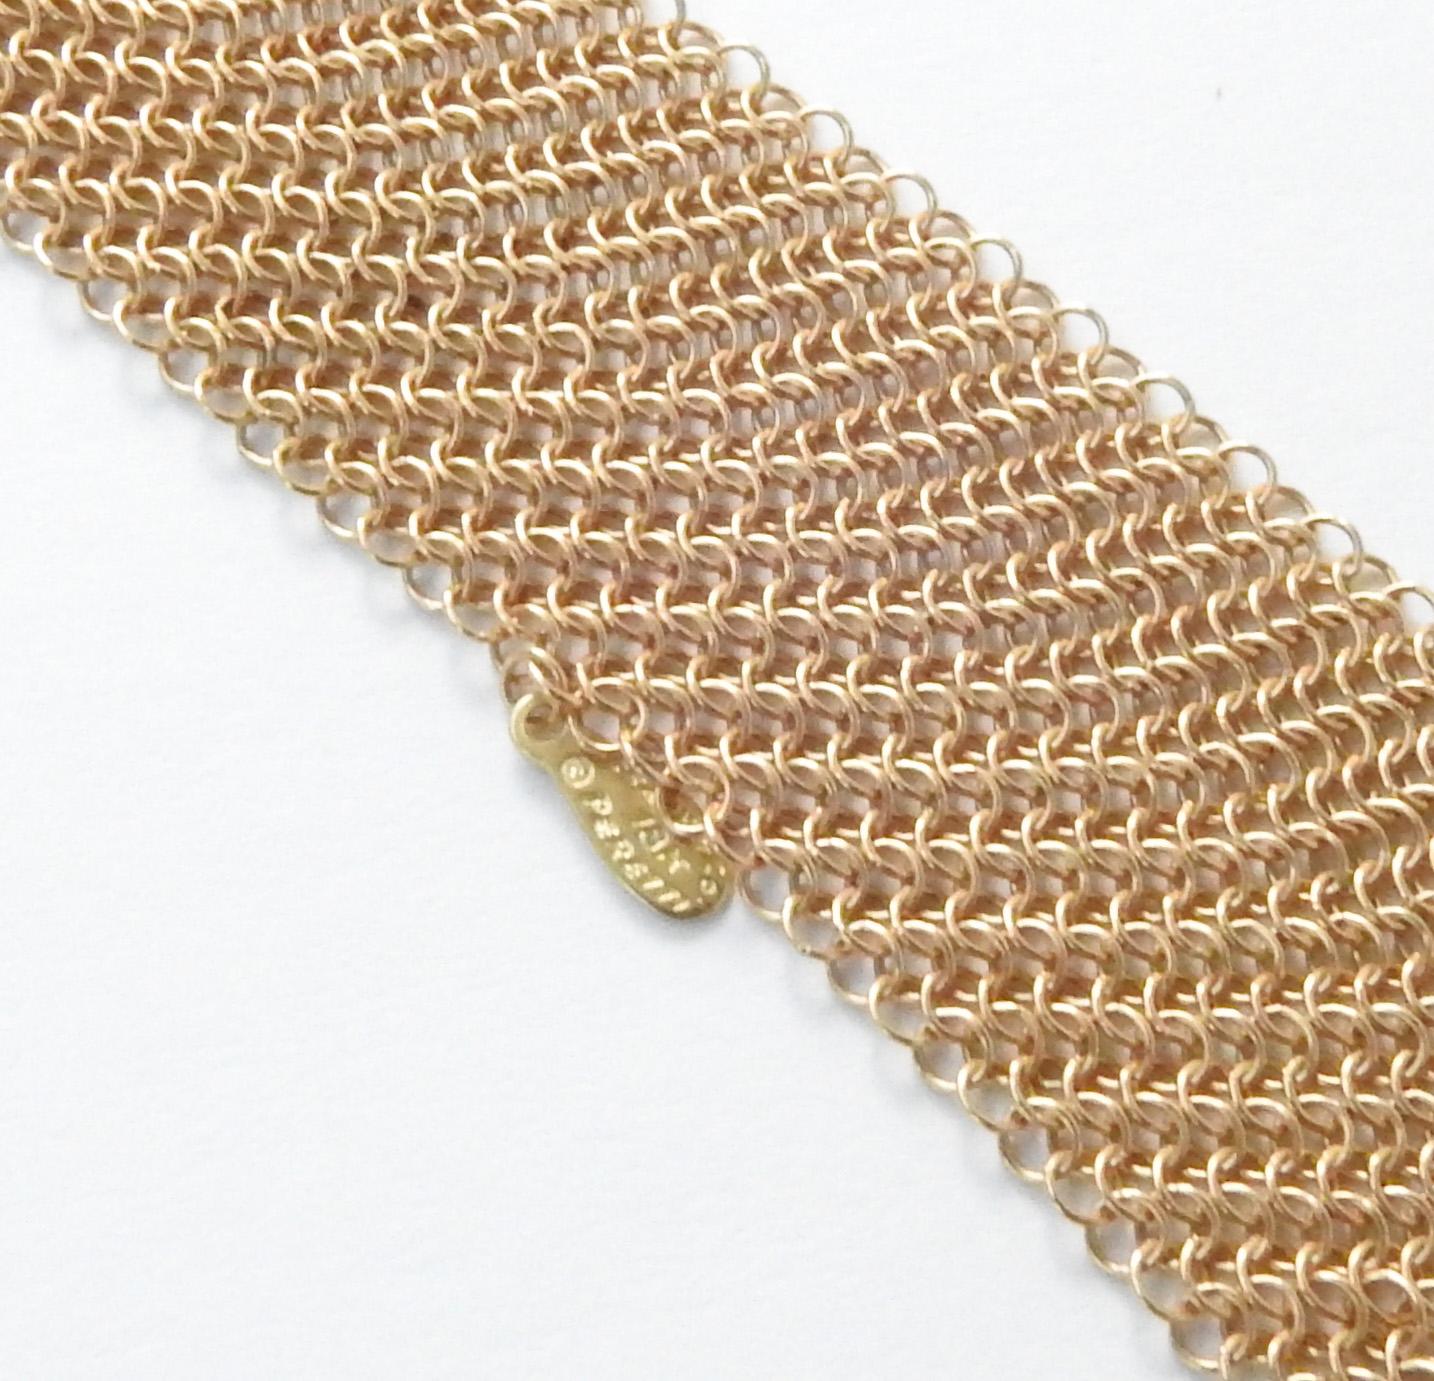 Tiffany & Co. Elsa Peretti 18K Yellow Gold Mesh Scarf Necklace

This authentic Tiffany & Co. mesh scarf is approx. 38